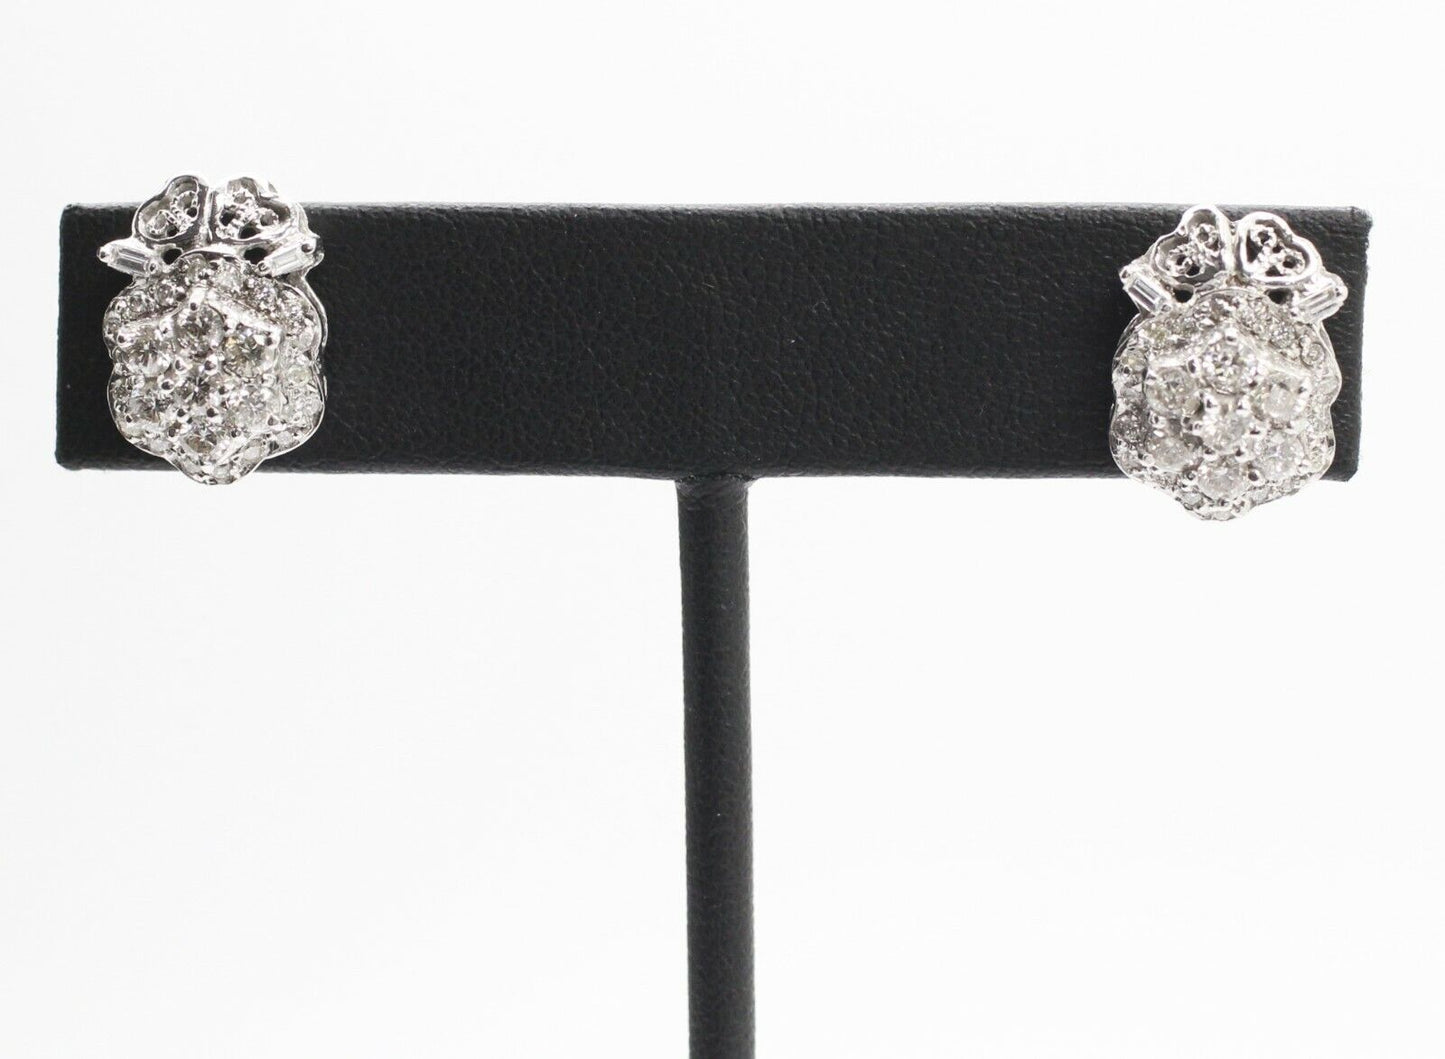 Palladium Cluster Stud Earrings With Round Diamond and Baguettes